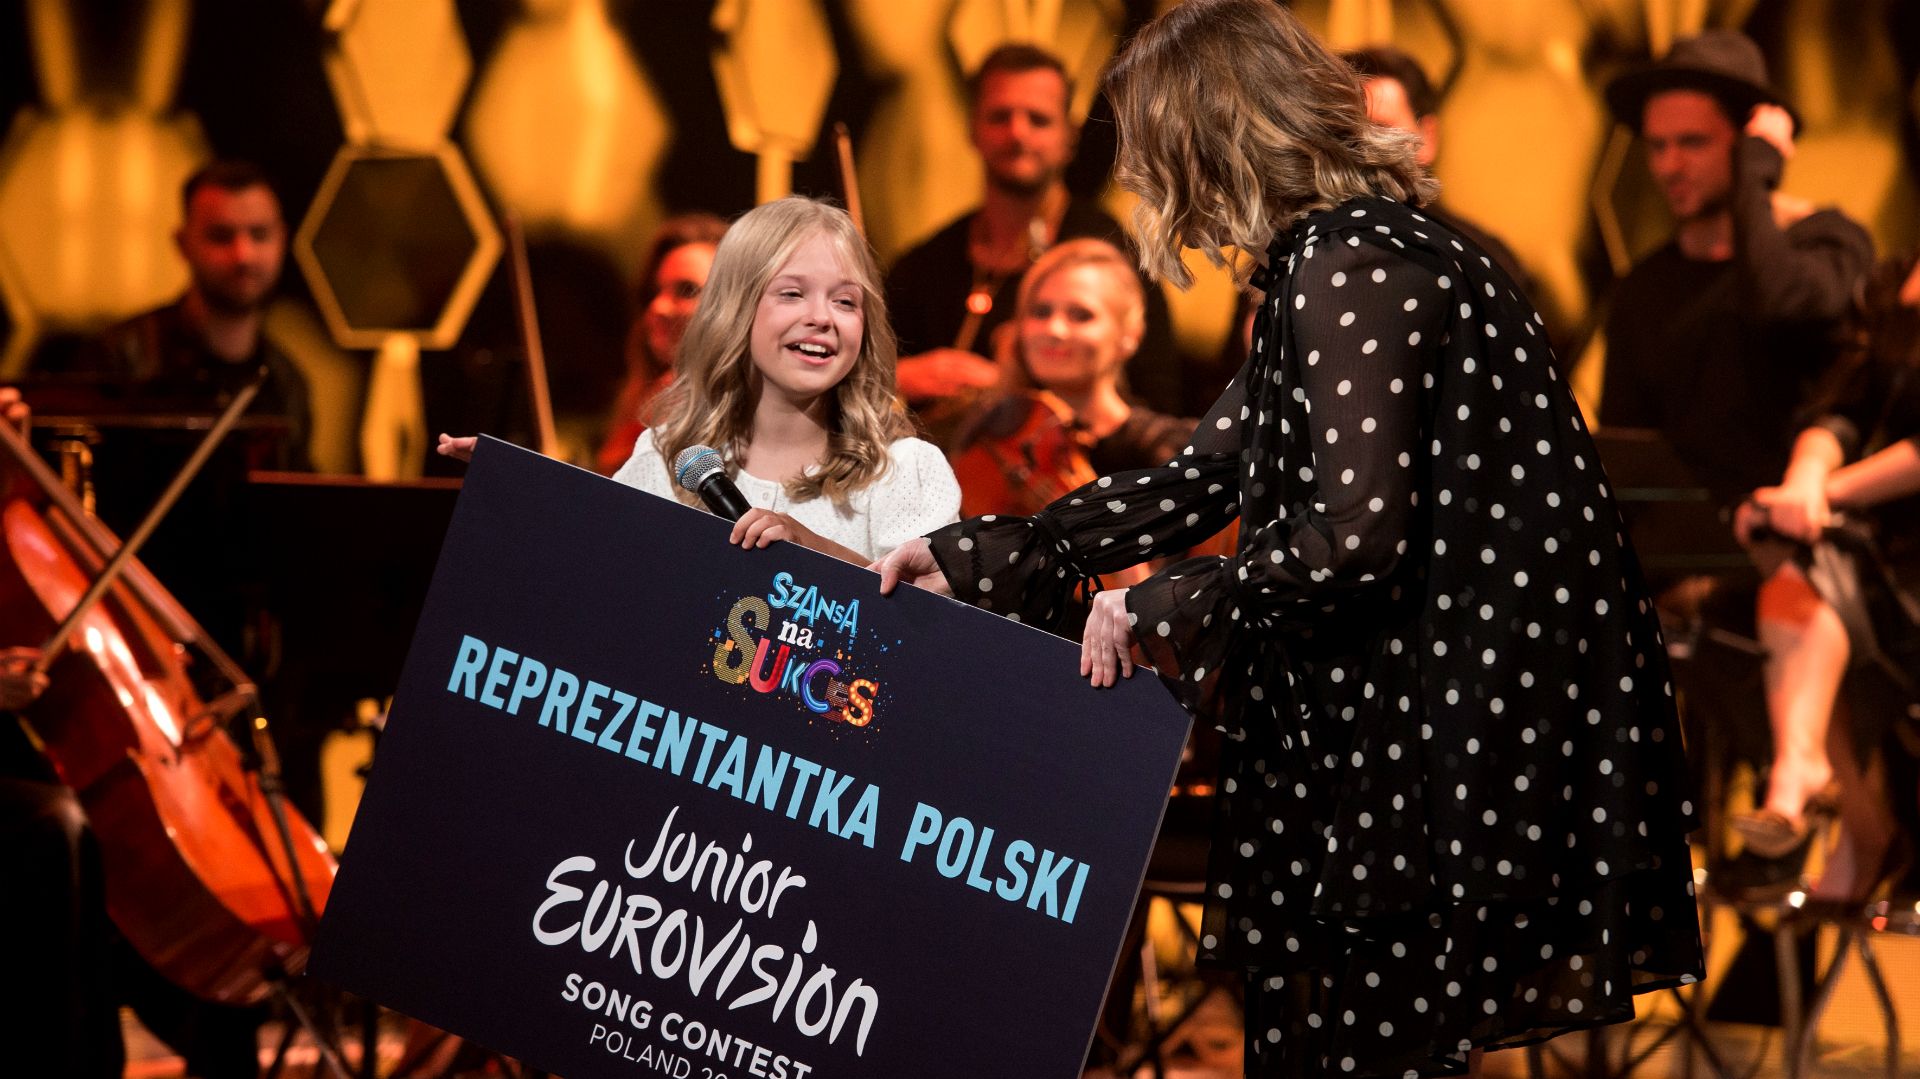 Junior Eurovision: Alicja Tracz will perform ‘I’ll Be Standing’ for Poland!